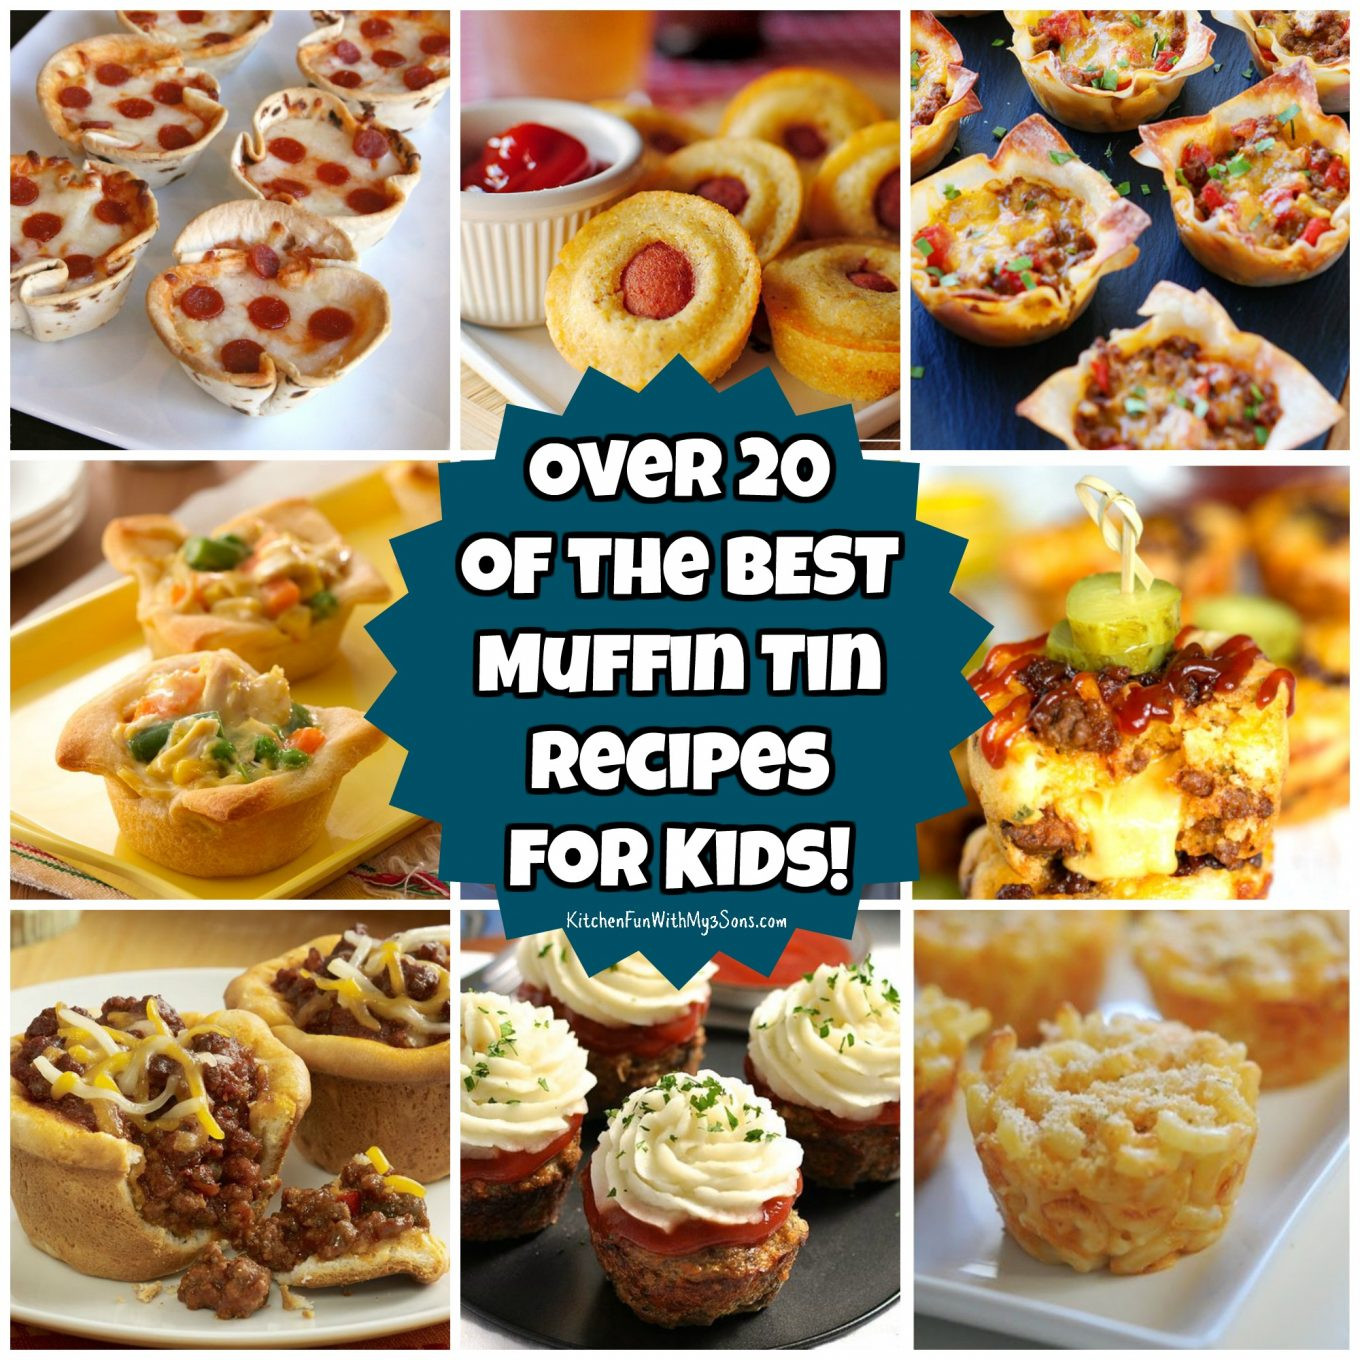 Best Kids Recipes
 20 Muffin Tin Recipes for Kids Kitchen Fun With My 3 Sons